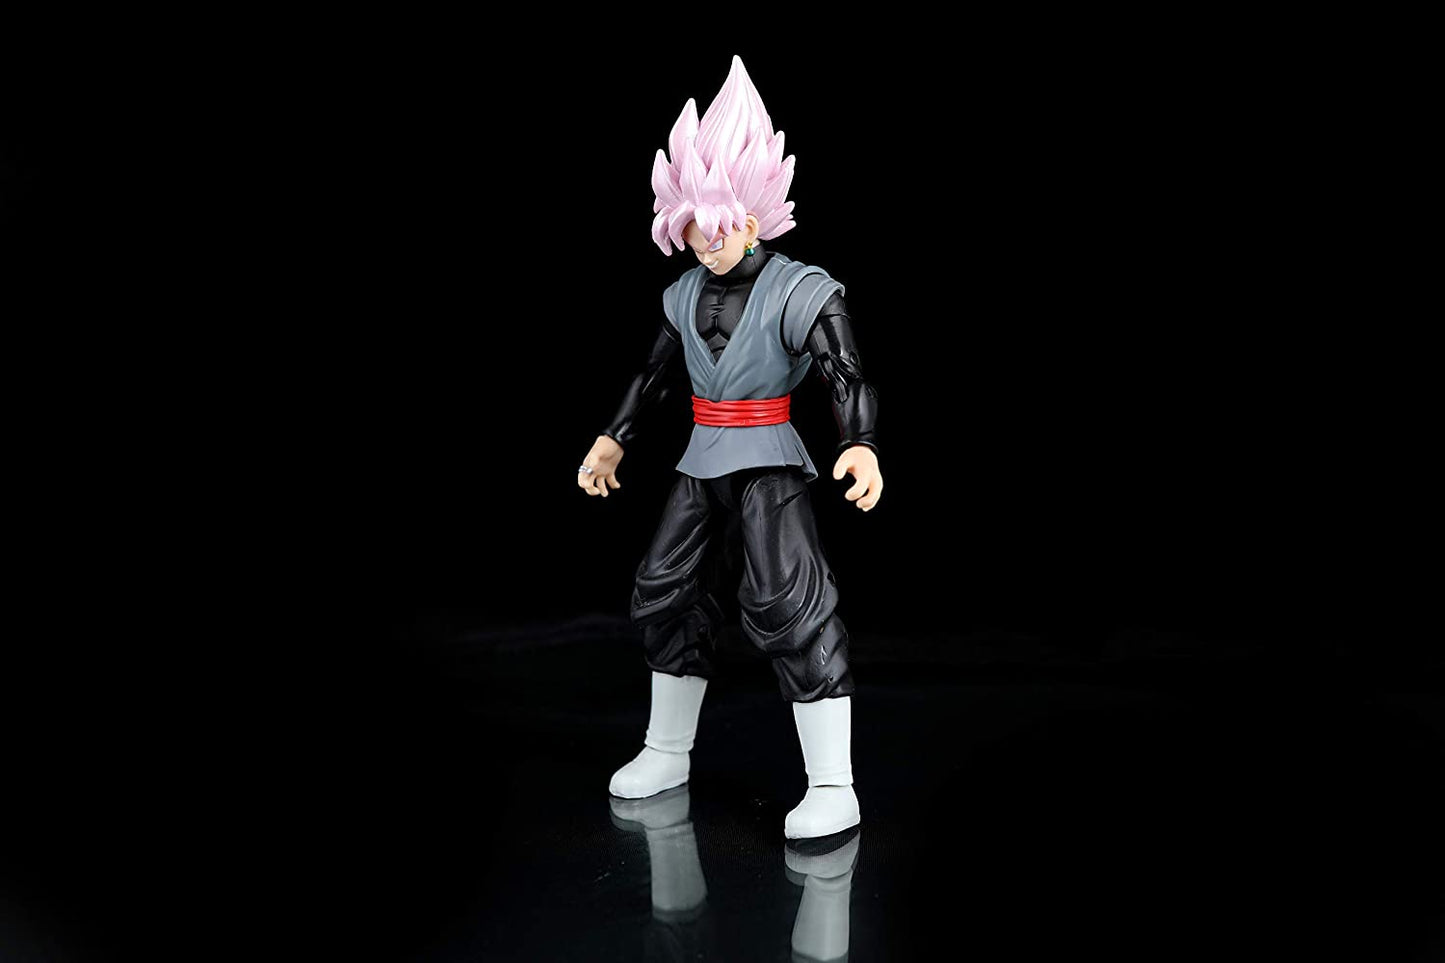 Load image into Gallery viewer, SS Rose Goku Black (Dragon Ball Super) Dragon Stars Action Figure
